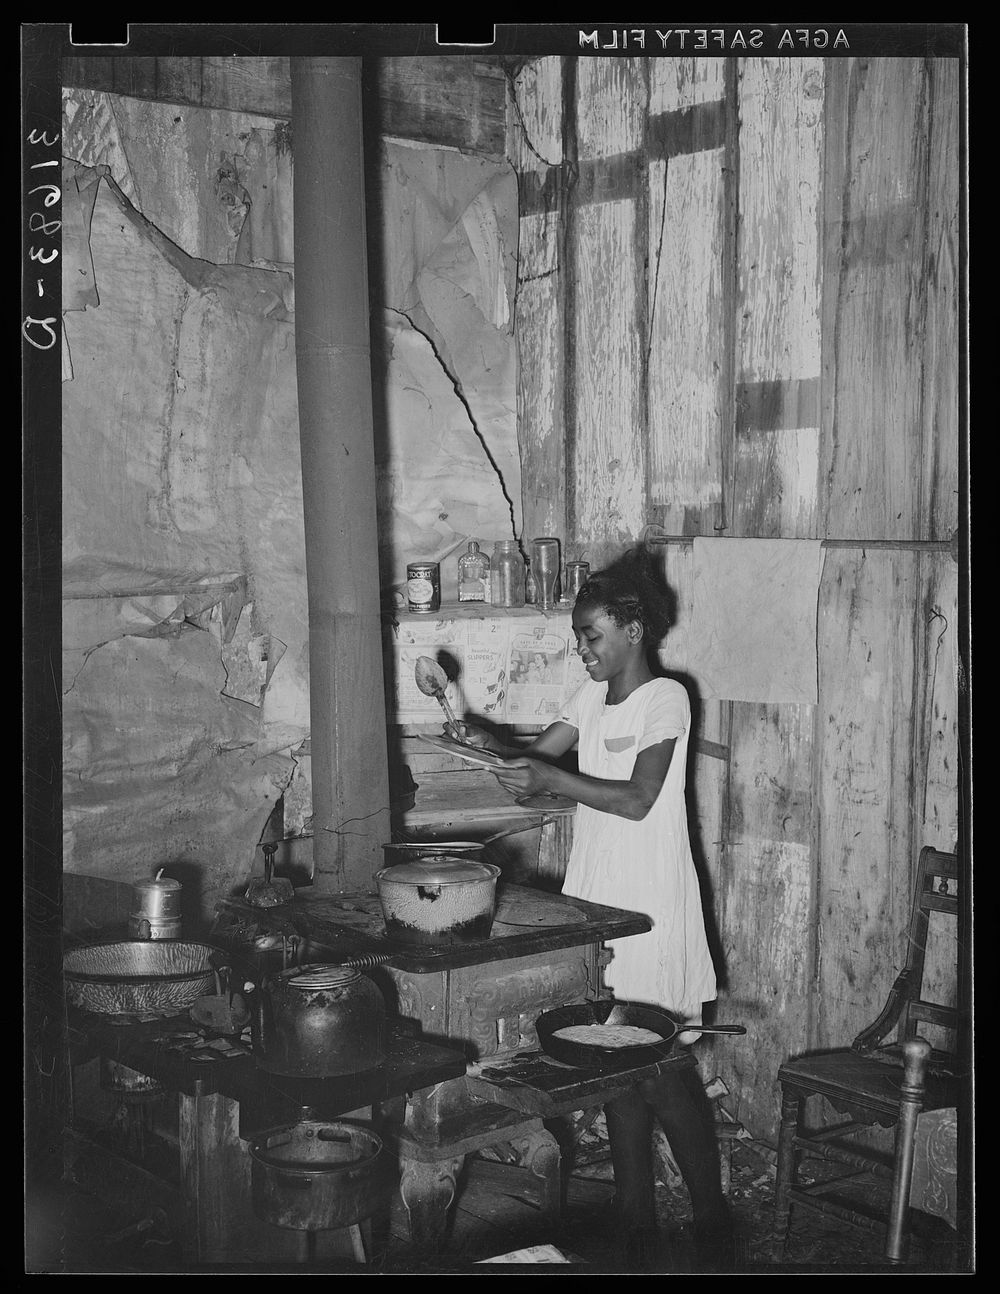  girl attending to food and stove in corner of kitchen, once a room in the old Trepagnier plantation house. Norco, Louisiana…